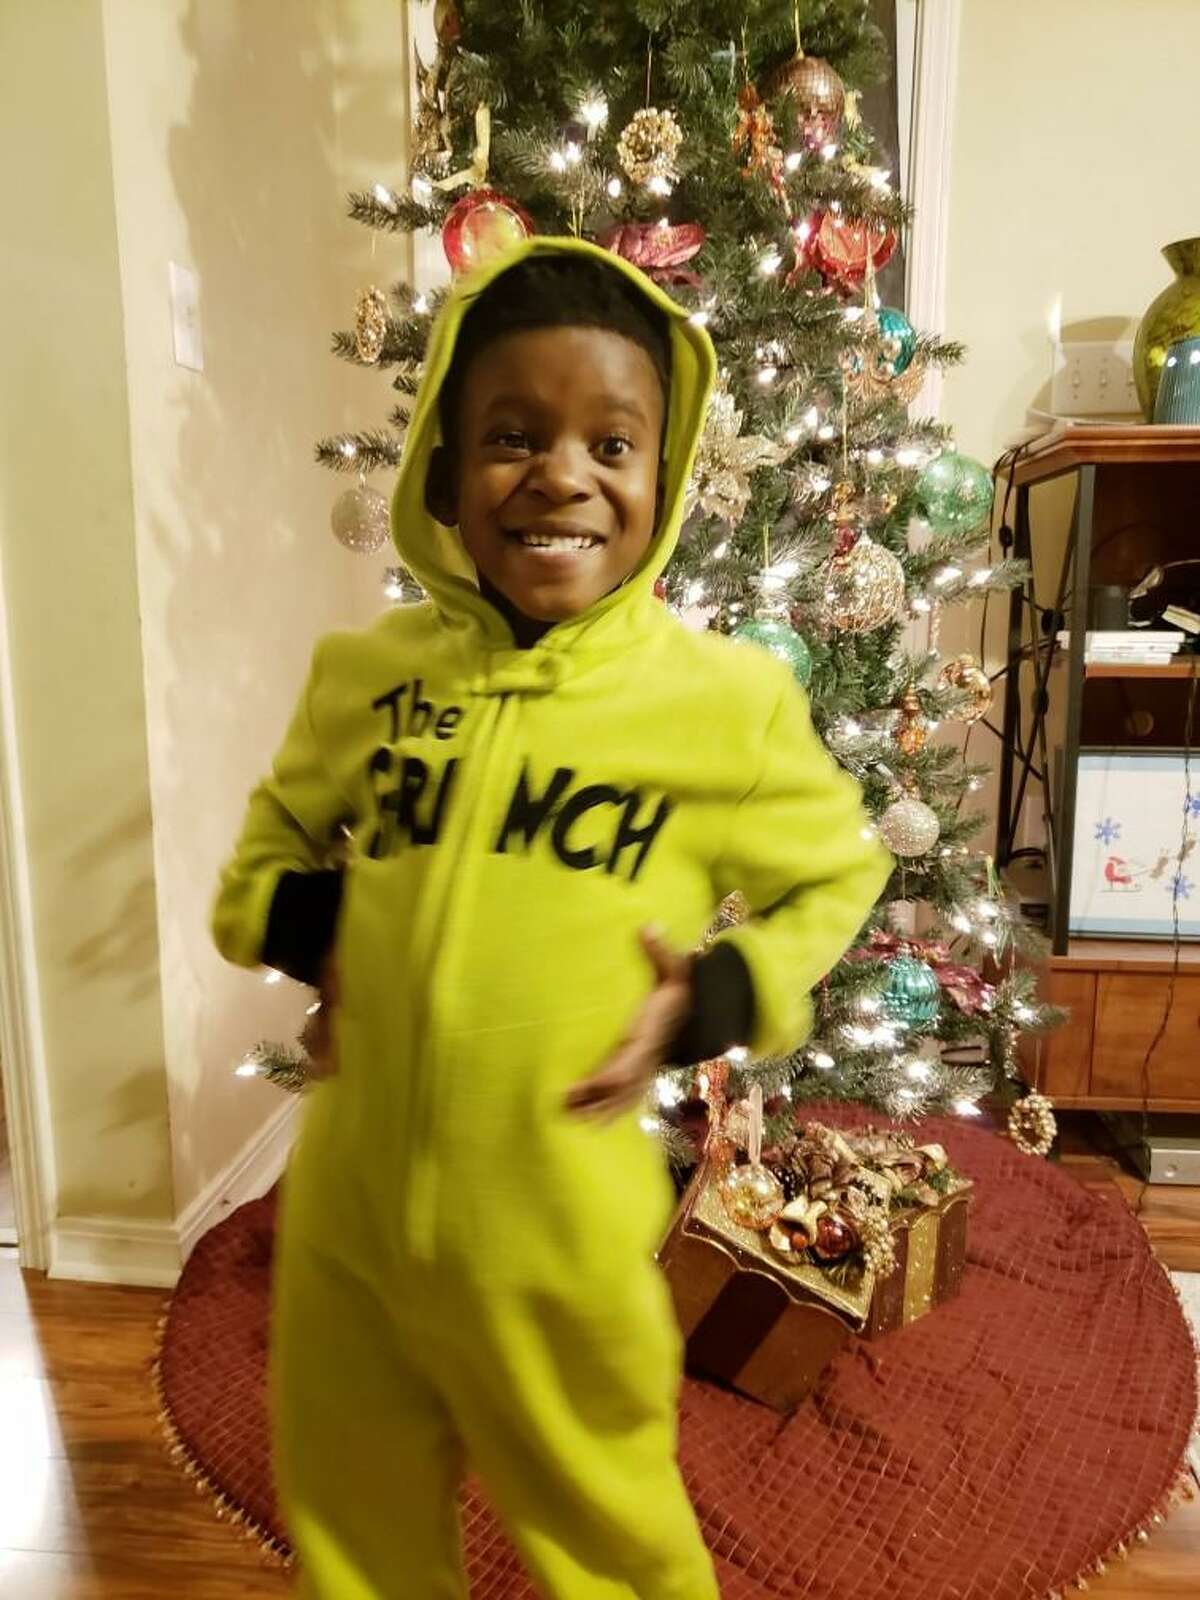 Like the famed Christmas Grinch, 9-year-old Kingston Foster's heart has grown three times its original size -- just in time for Christmas.